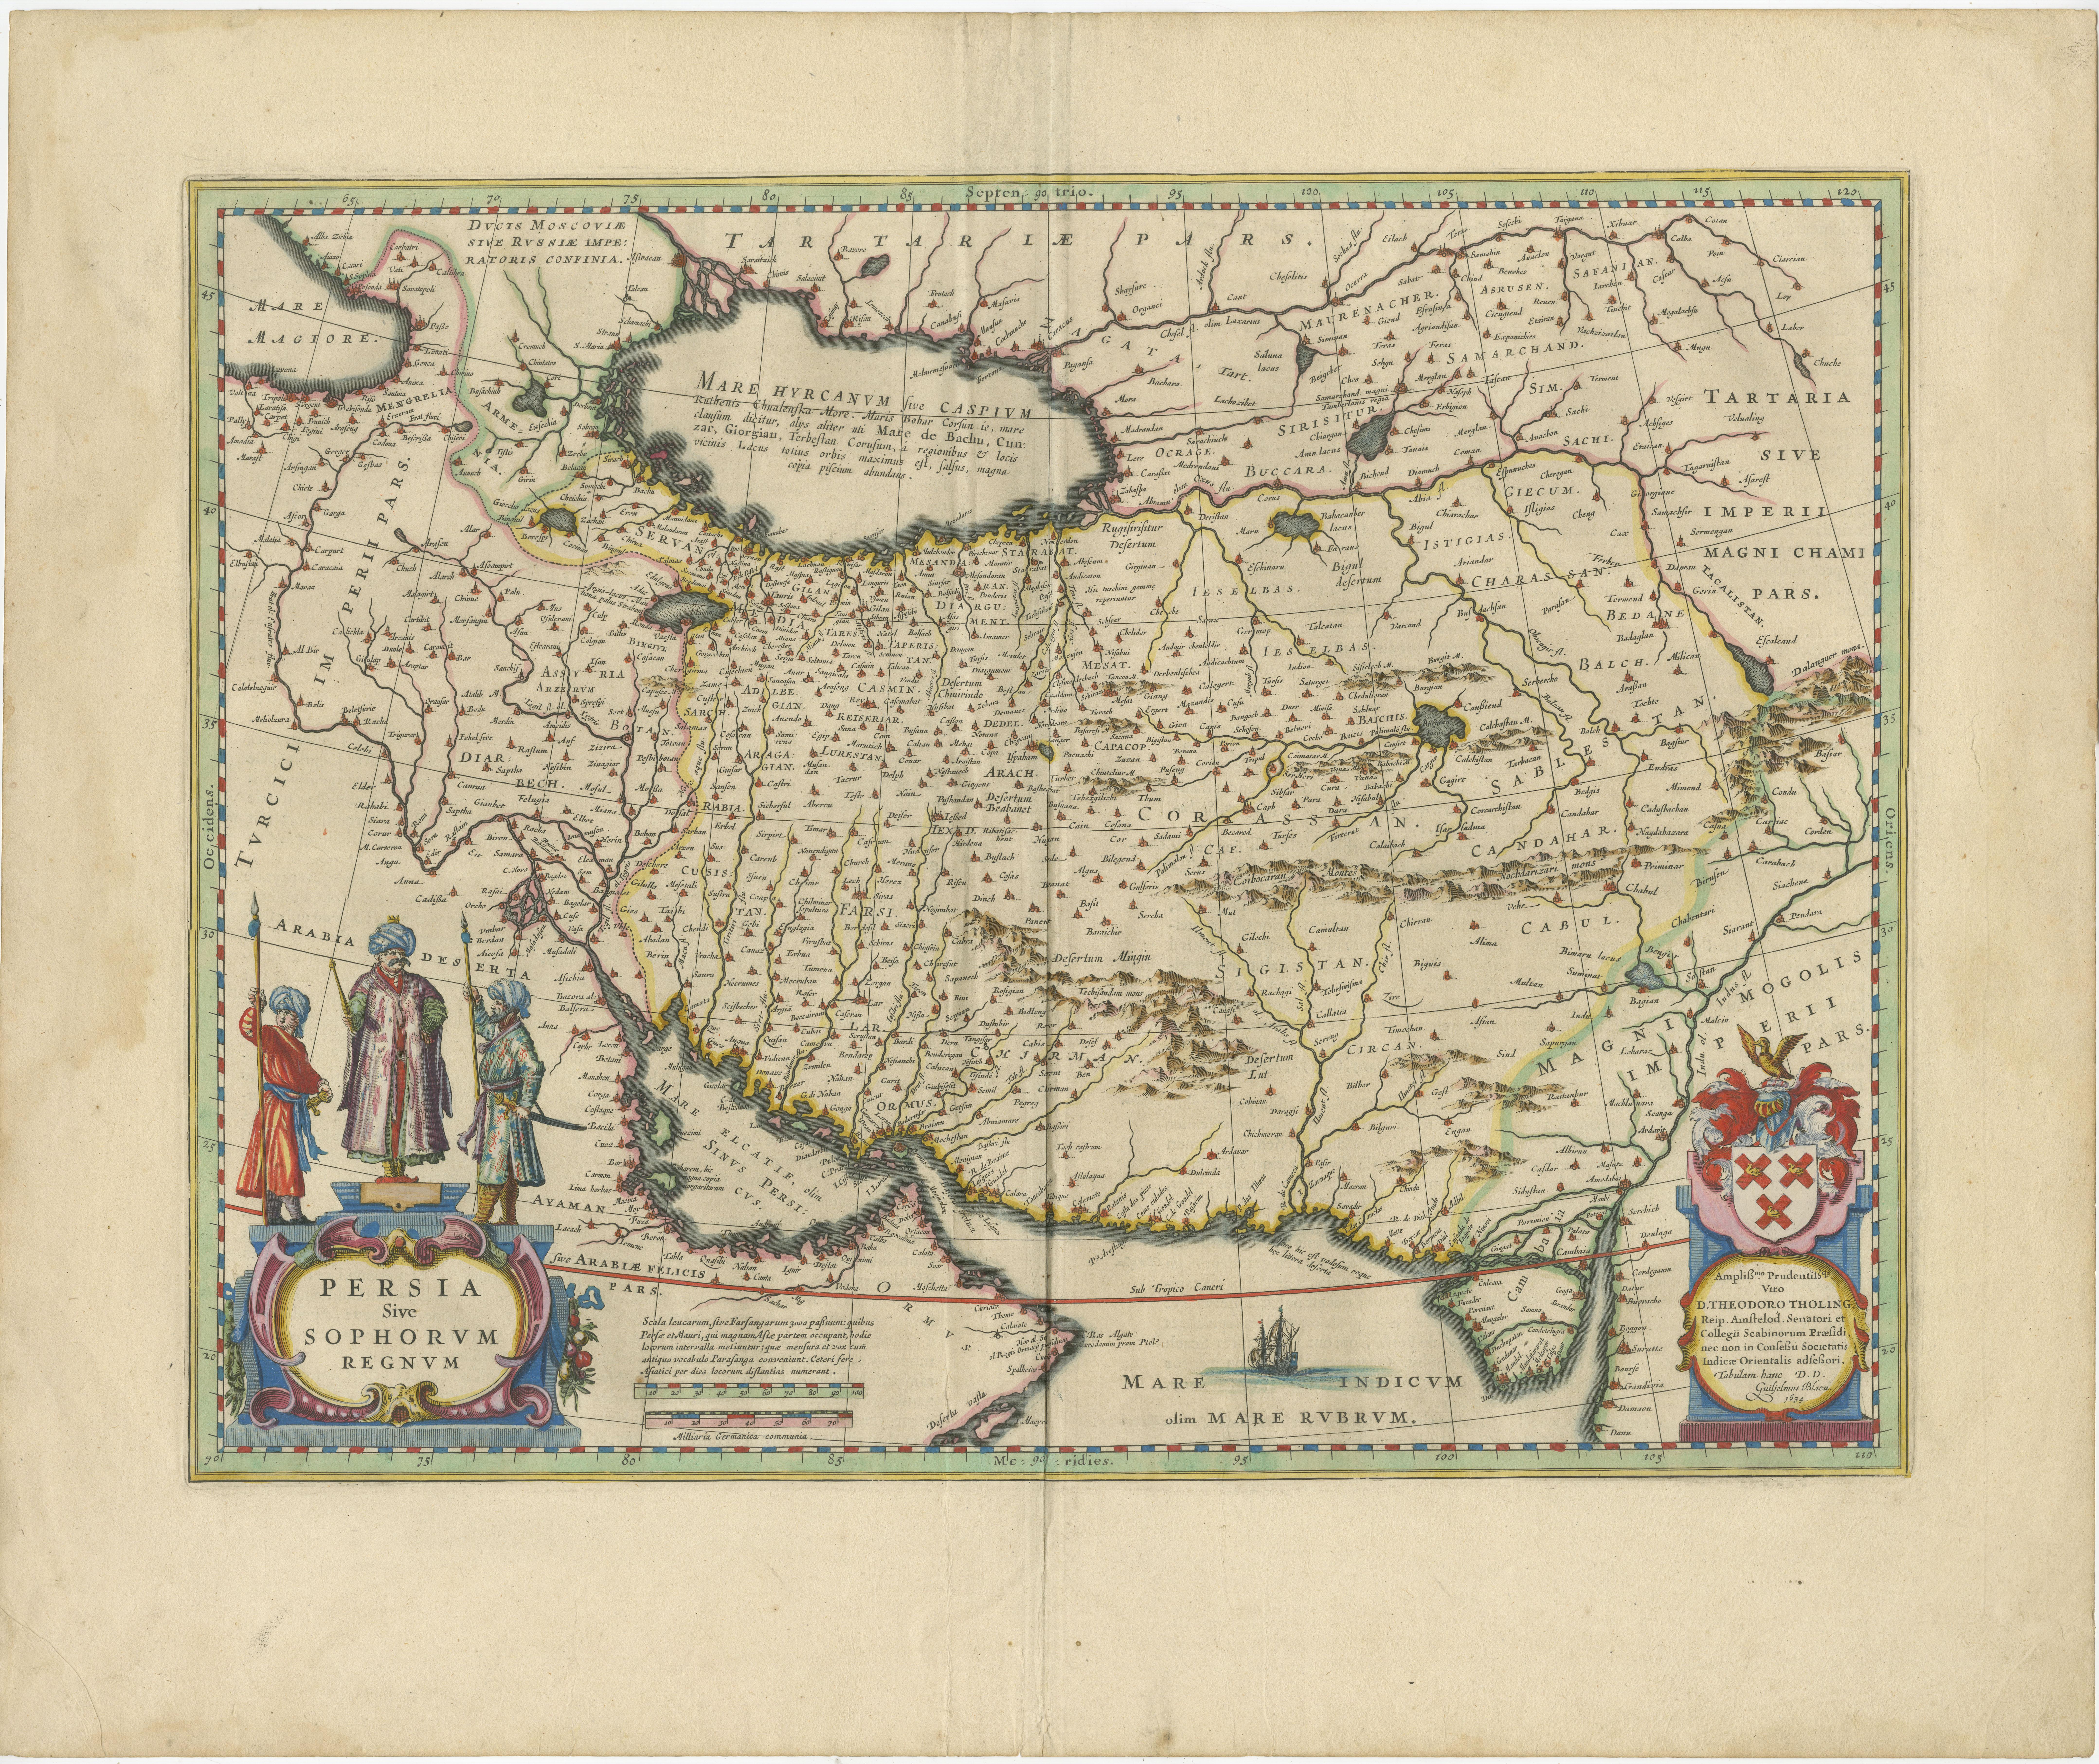 Antique map titled 'Persia sive Sophorum Regnum'. Original old map of Persia. The map extends from the Eastern Mediteranian to Tacalistan and the Indus River and the Dalanguer Mountains and the Cabul Region, with the Red Sea and the Persian Gulf in